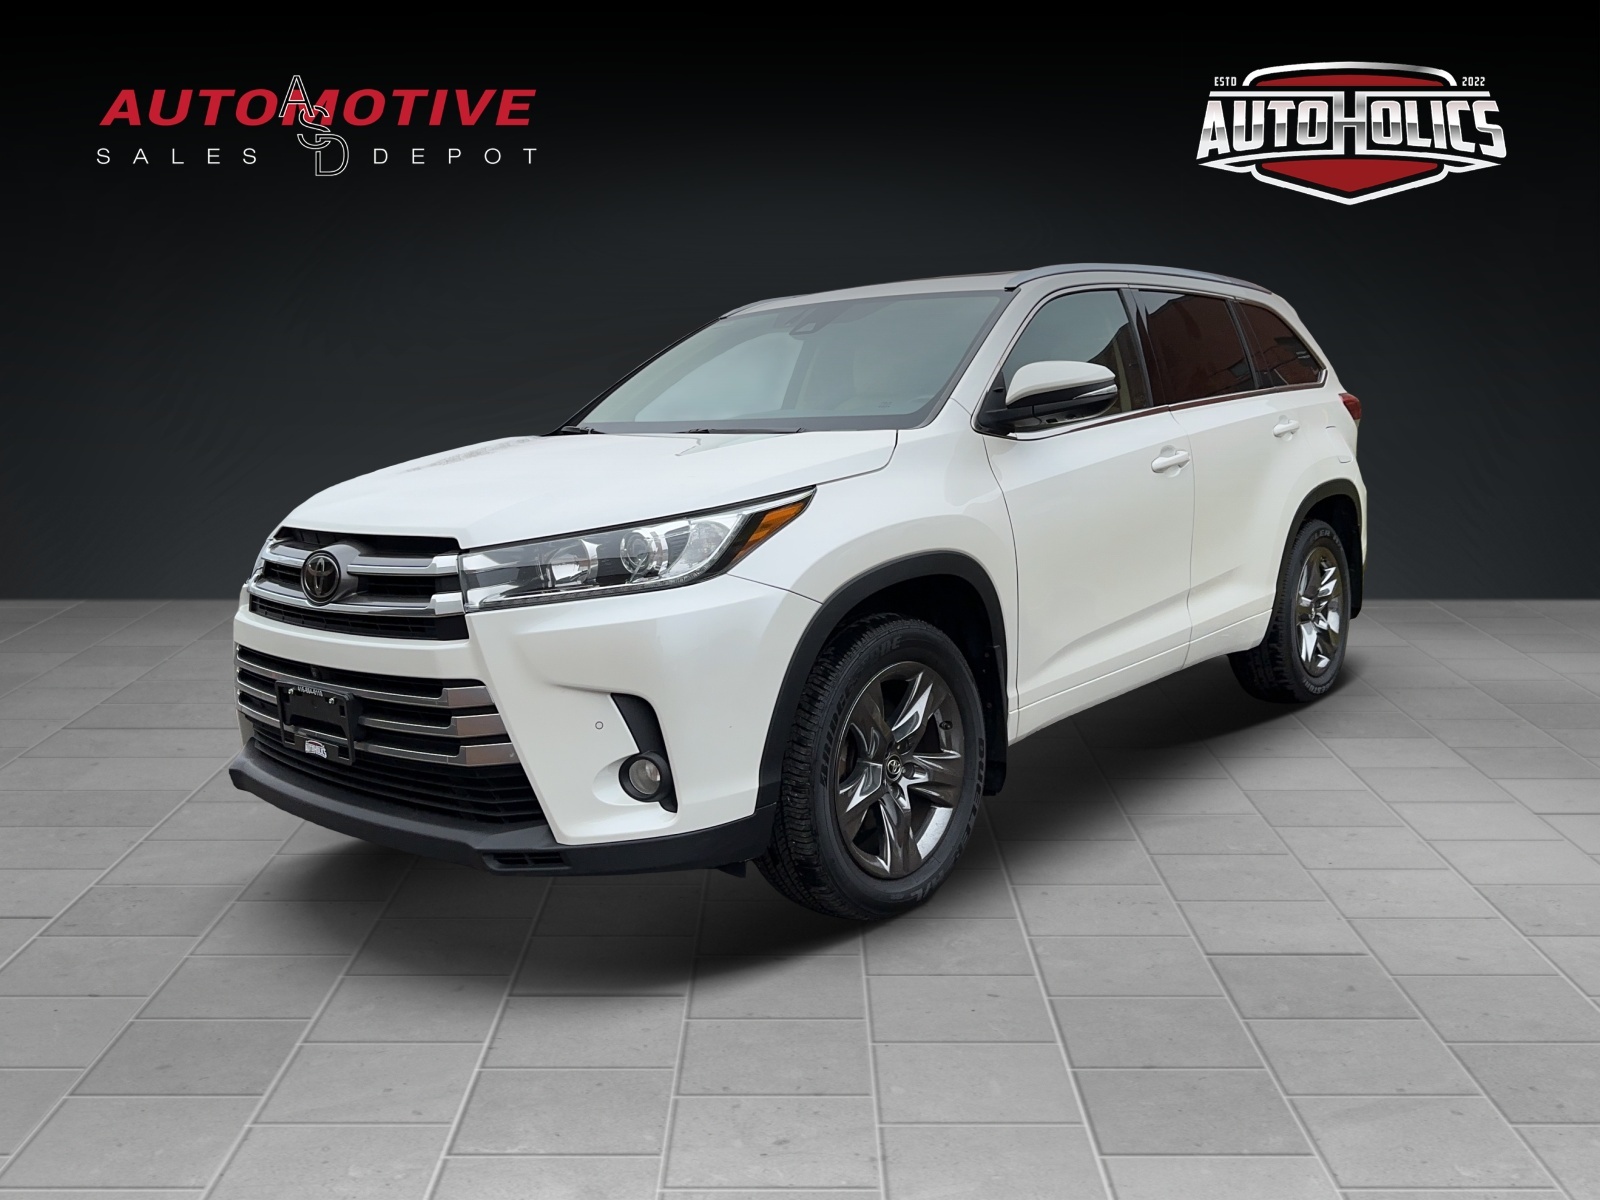 2018 Toyota Highlander LIMITED AWD (NO ACCIDENTS)